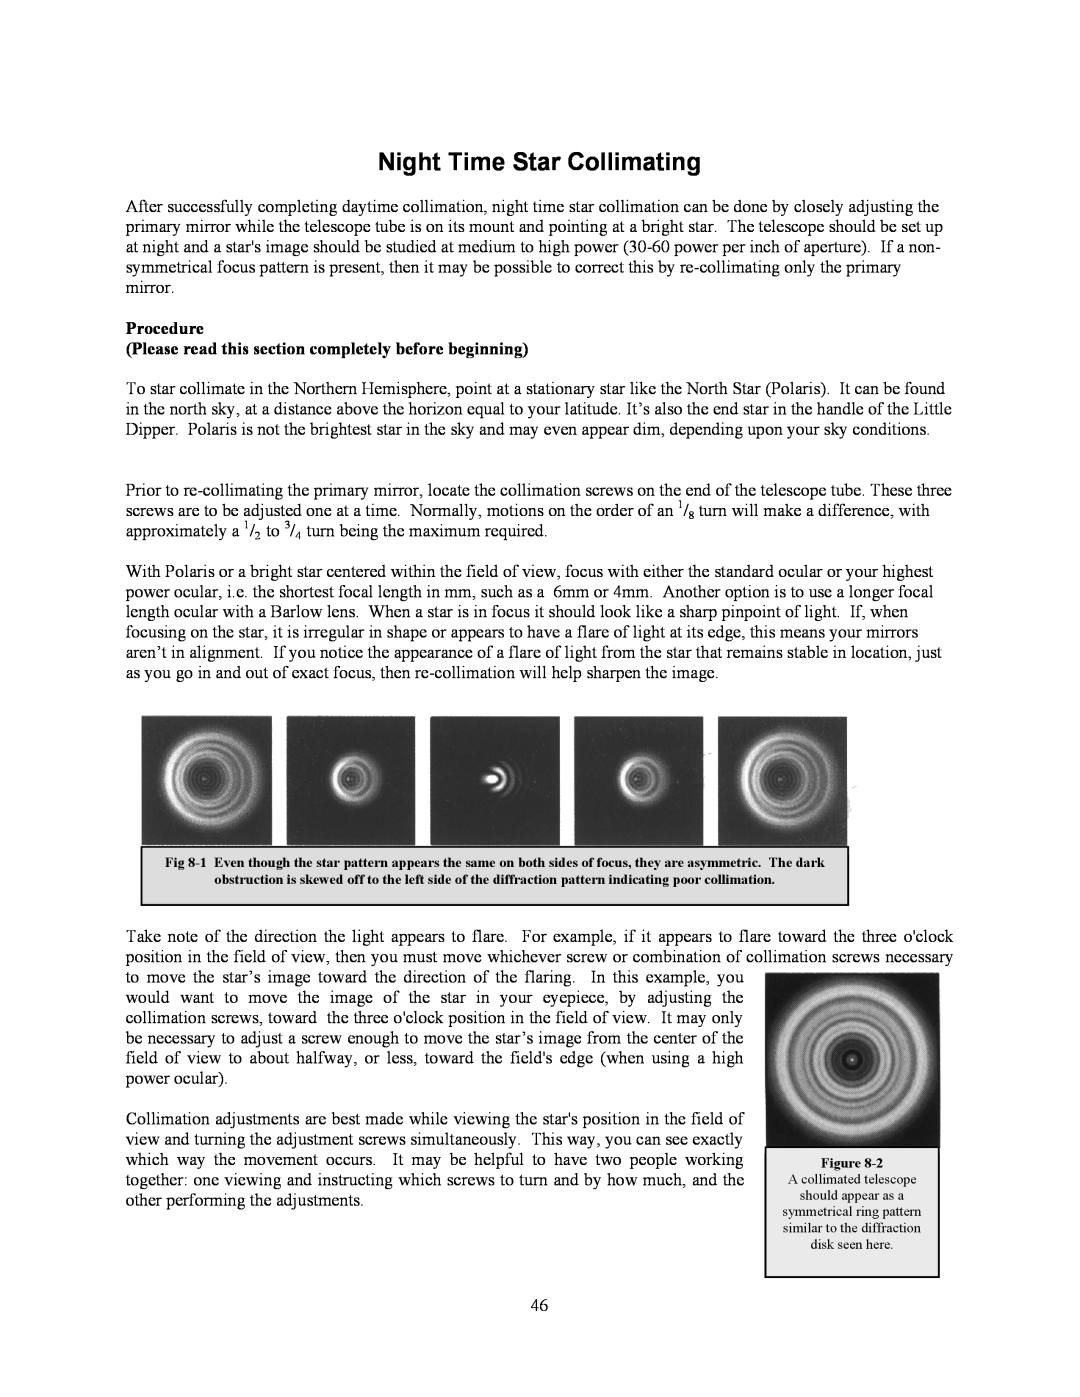 Celestron C8-NGT, C10-N manual Night Time Star Collimating, Procedure Please read this section completely before beginning 